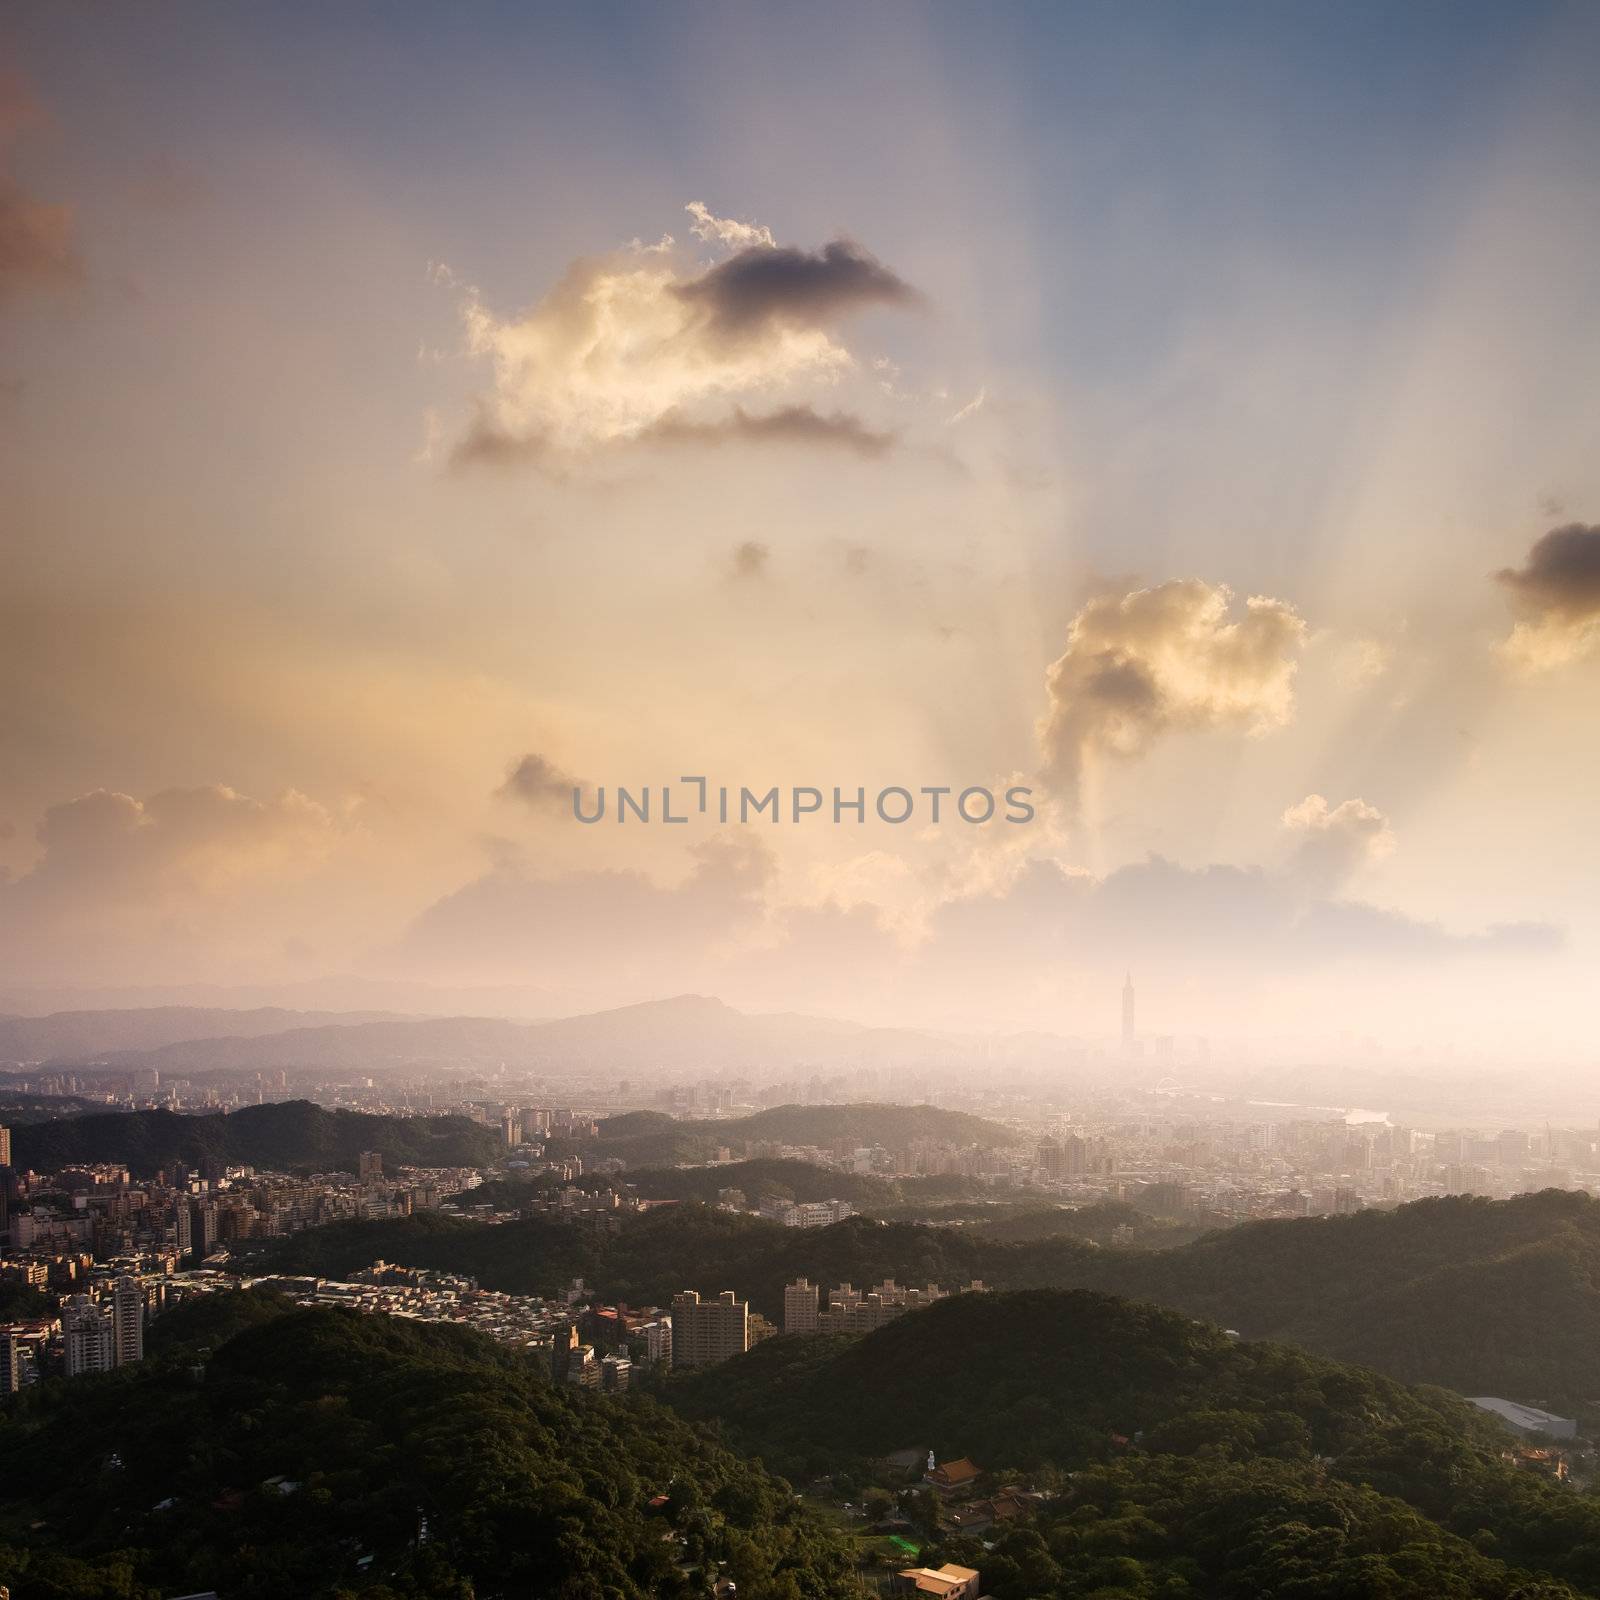 Cityscape of sunset with beautiful light and buildings in the city of Taipei, Taiwan.